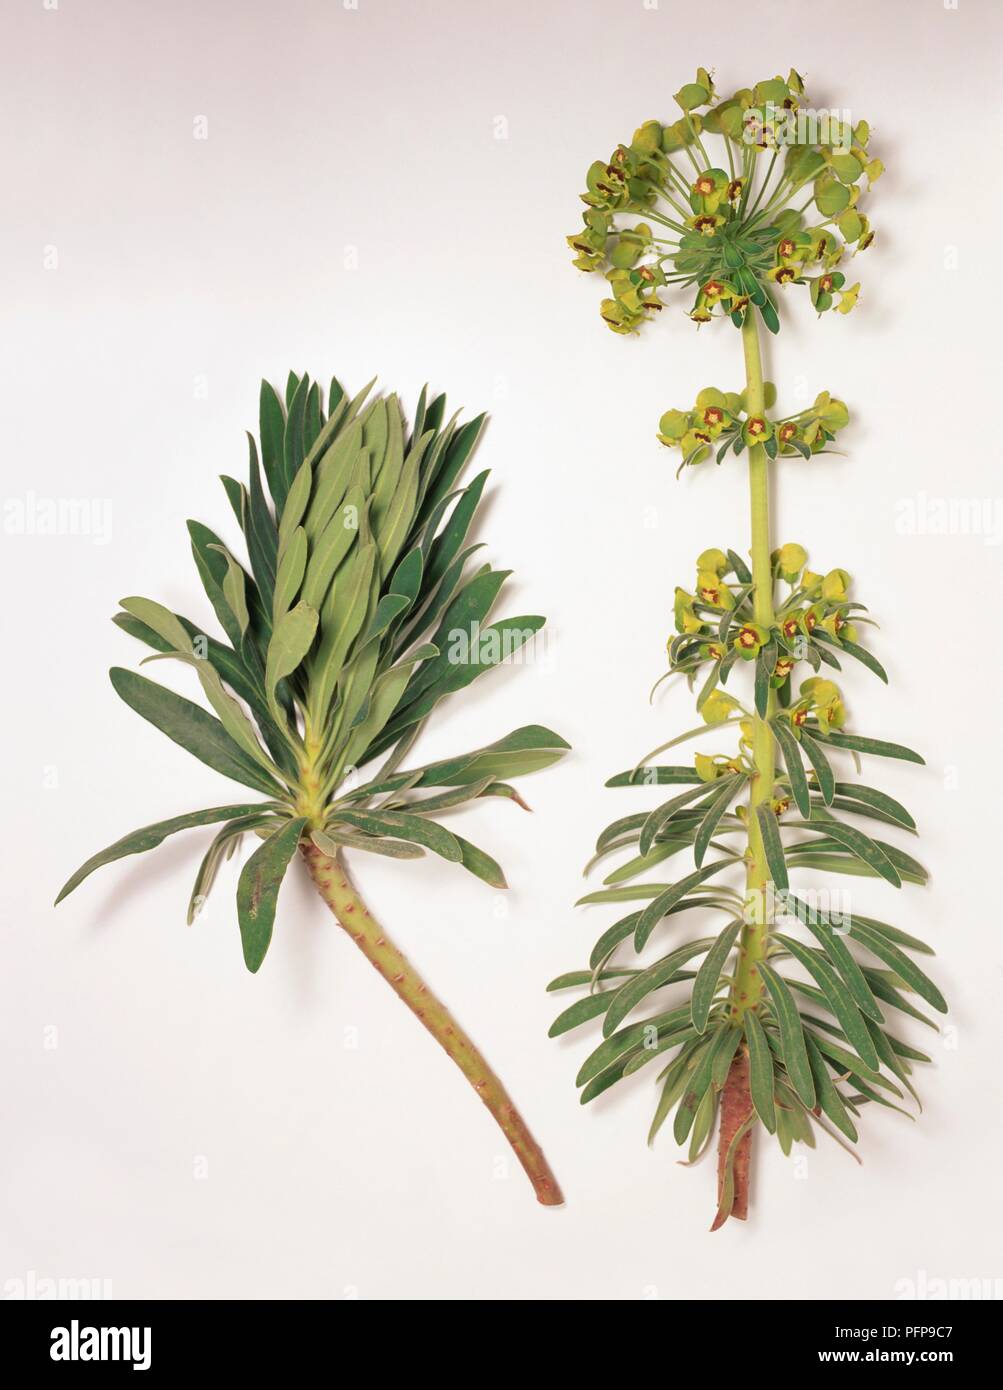 Euphorbia characias (Large Mediterranean Spurge) with flowers and leaves on long stems Stock Photo